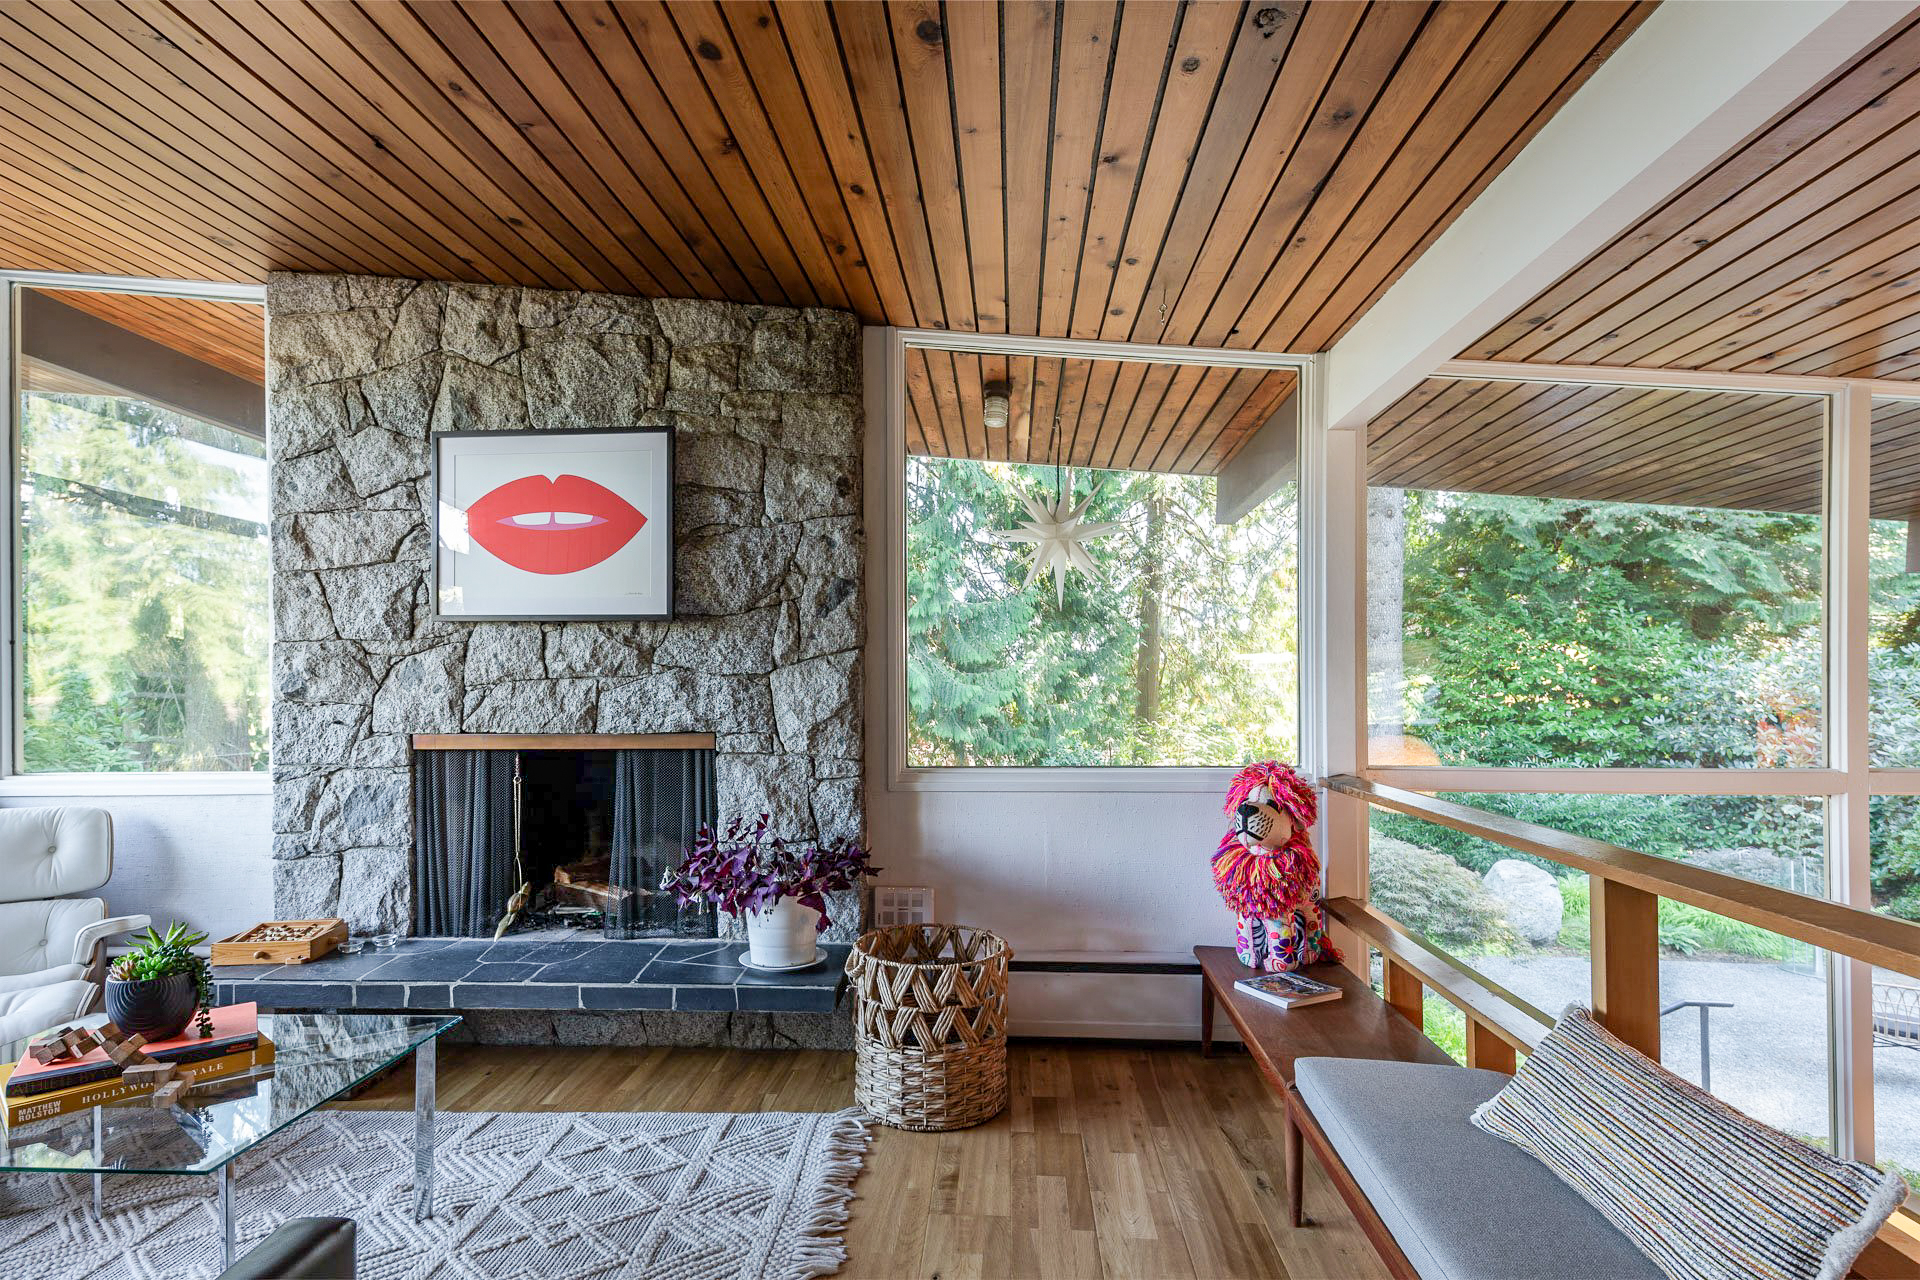 661 East Windsor Road, North Vancouver - sold west coast modern - photo 6